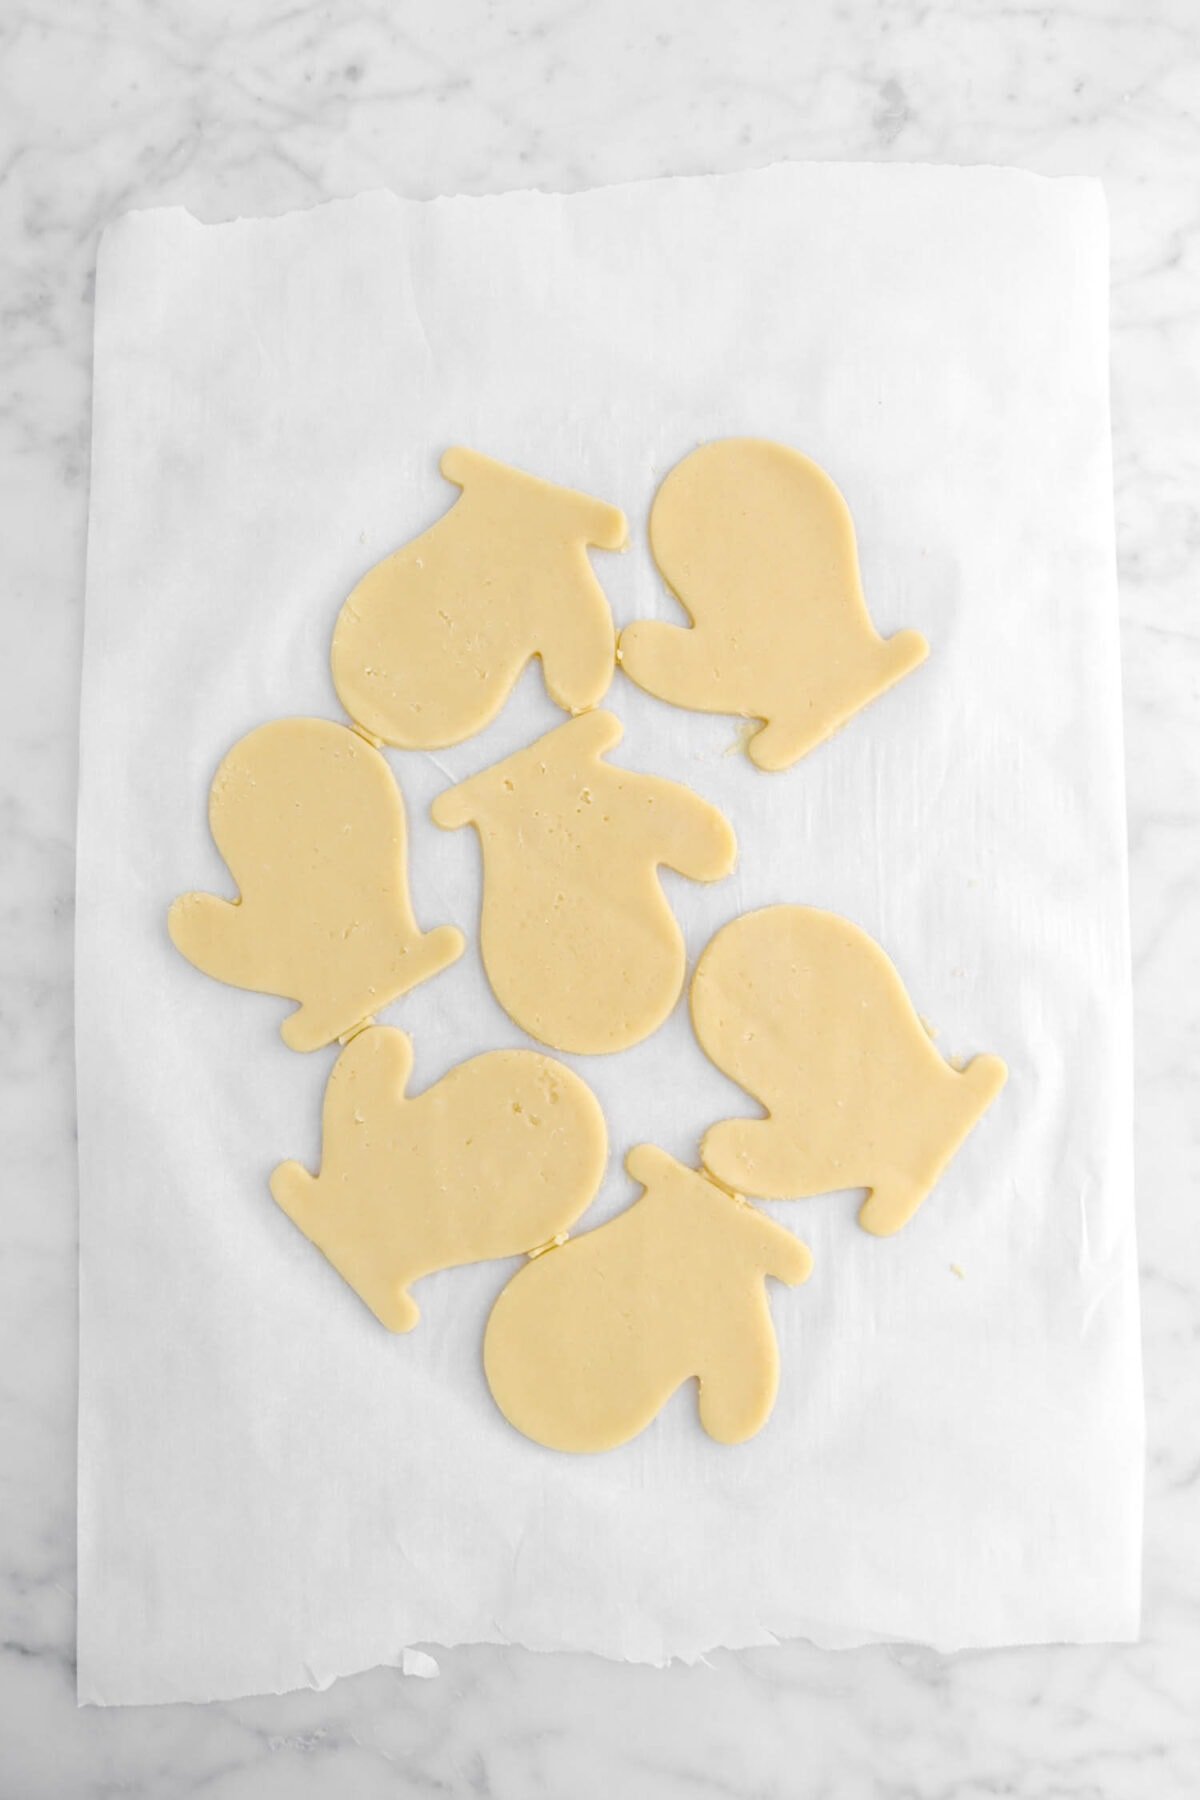 seven glove shaped unbaked cookies on parchment paper.